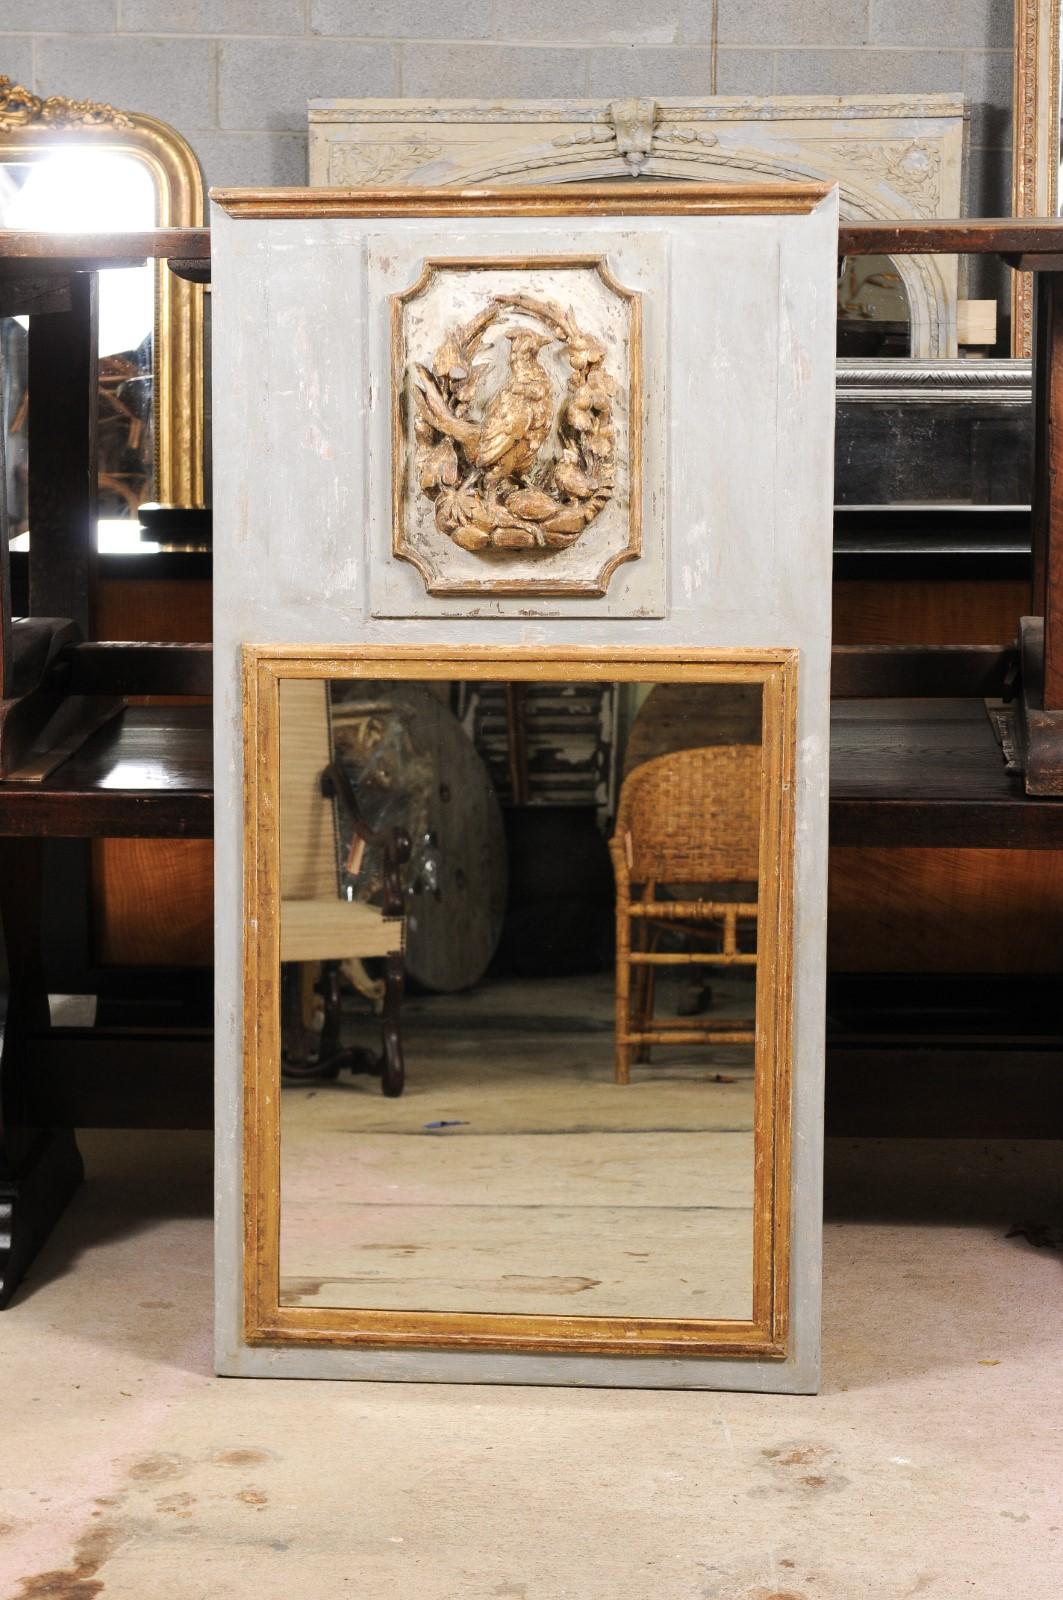 Two contemporary French grey painted trumeau mirrors made of old repurposed wood with hunting trophies and golden accents, priced and sold individually. We’re always on the hunt for pairs of trumeaux, and when they come with their own pretty hunting